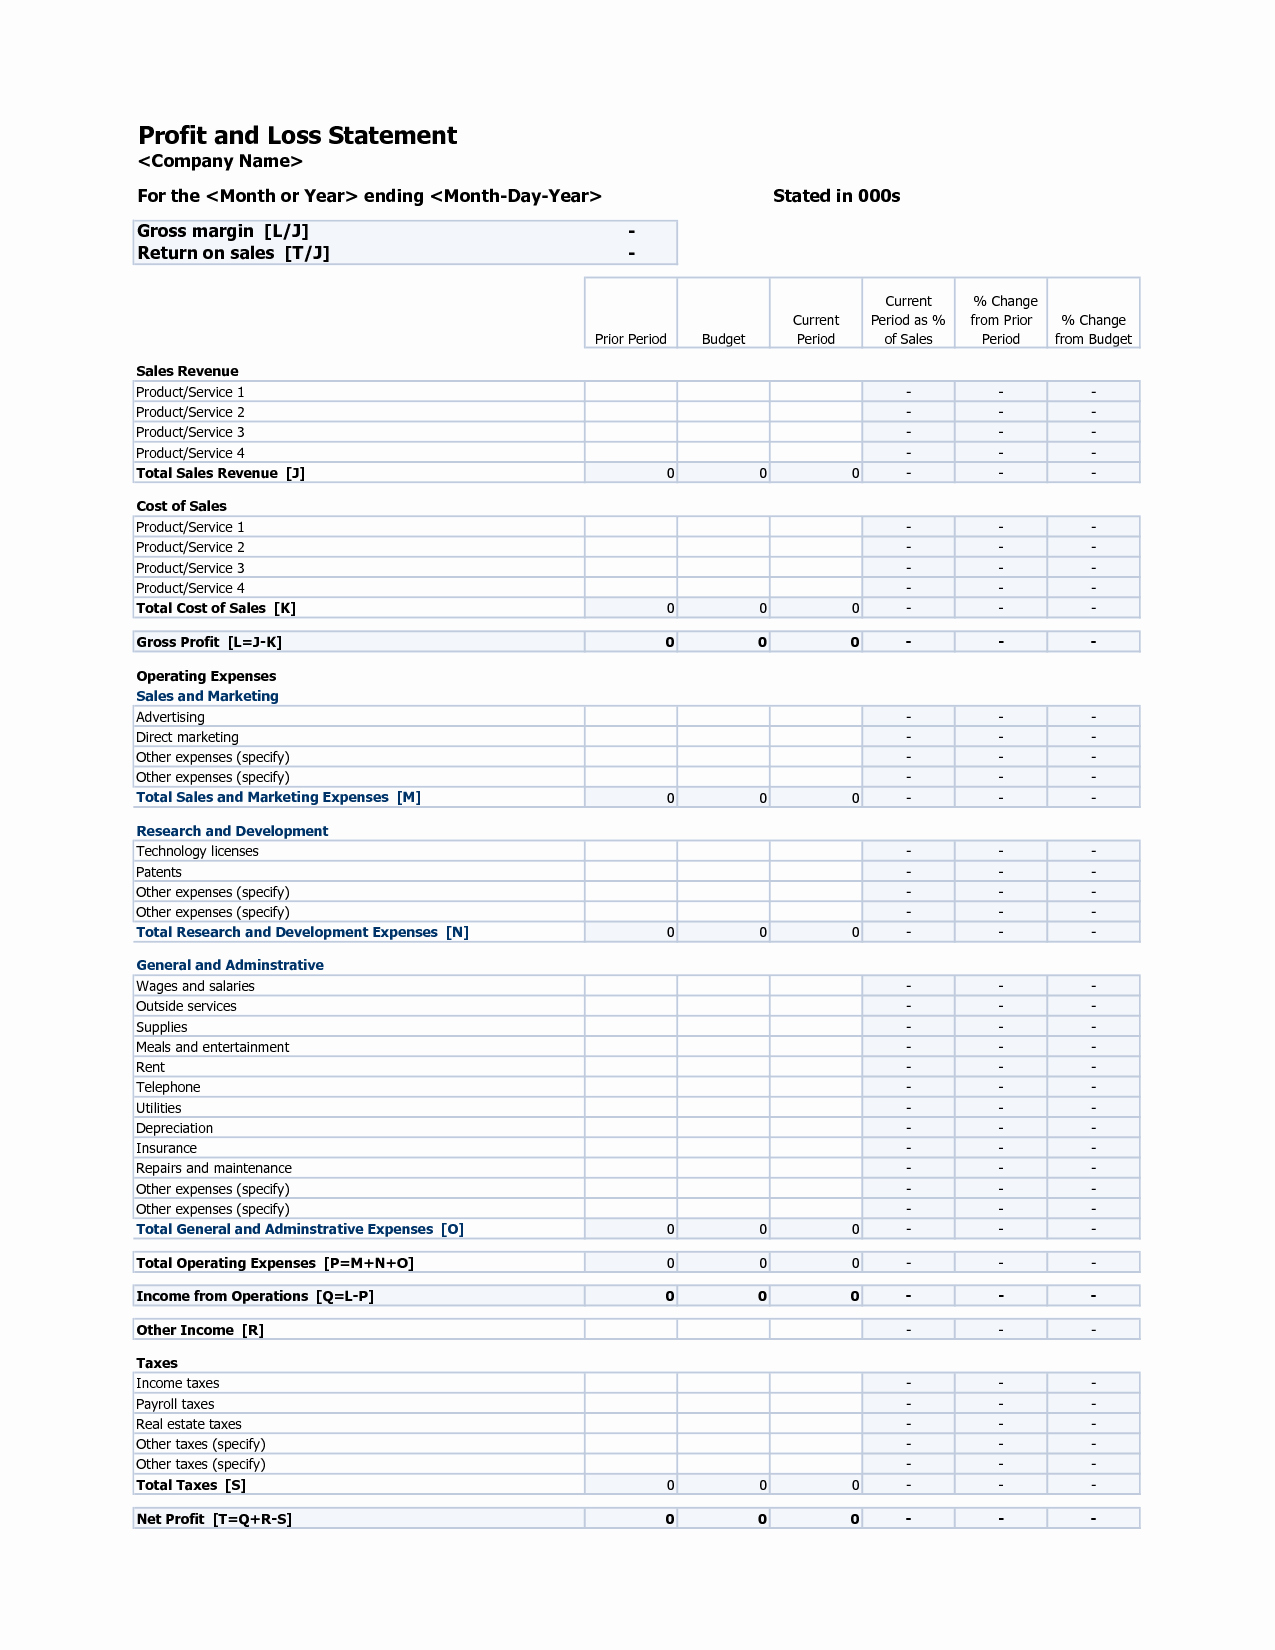 Quarterly Report Template Excel Elegant Profit and Loss Statement Excel Template to Do List Ideas